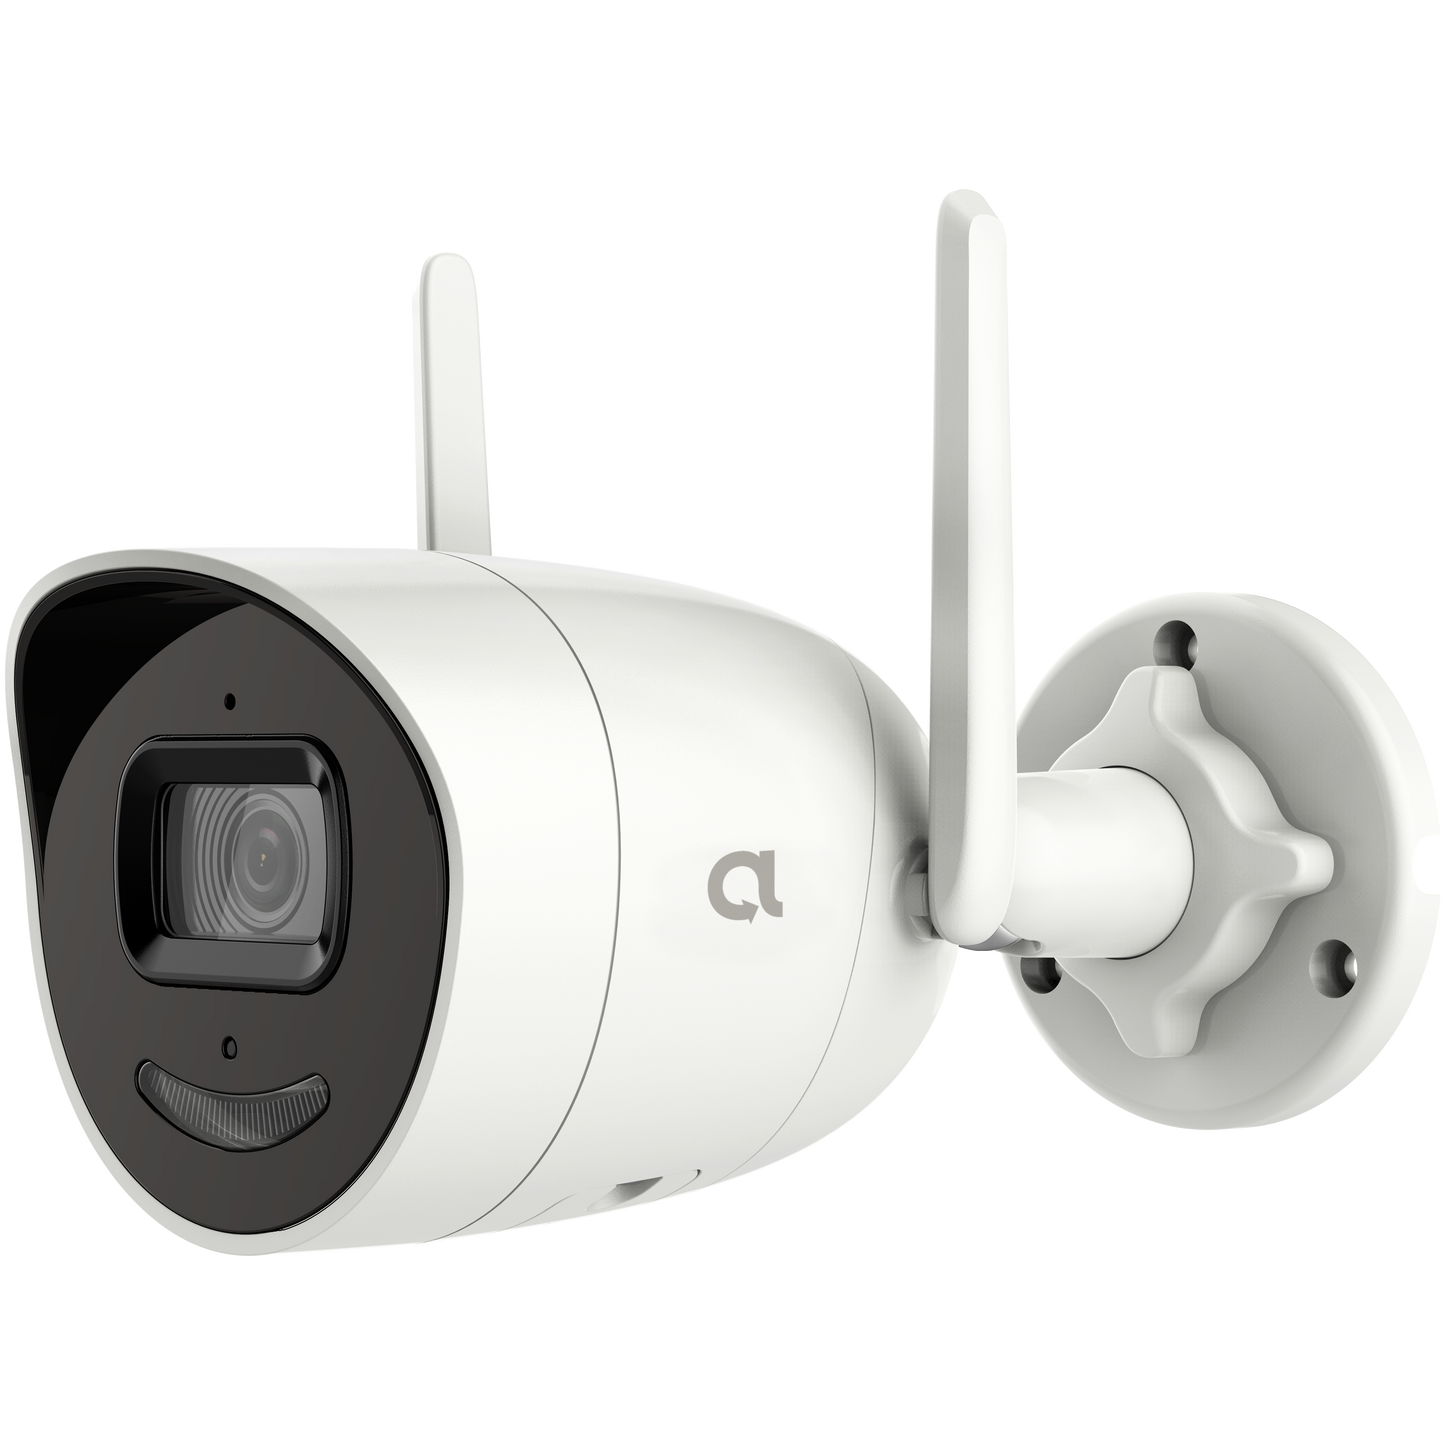 Alula Outdoor WiFI Bullet Camera Gen 2 with AI